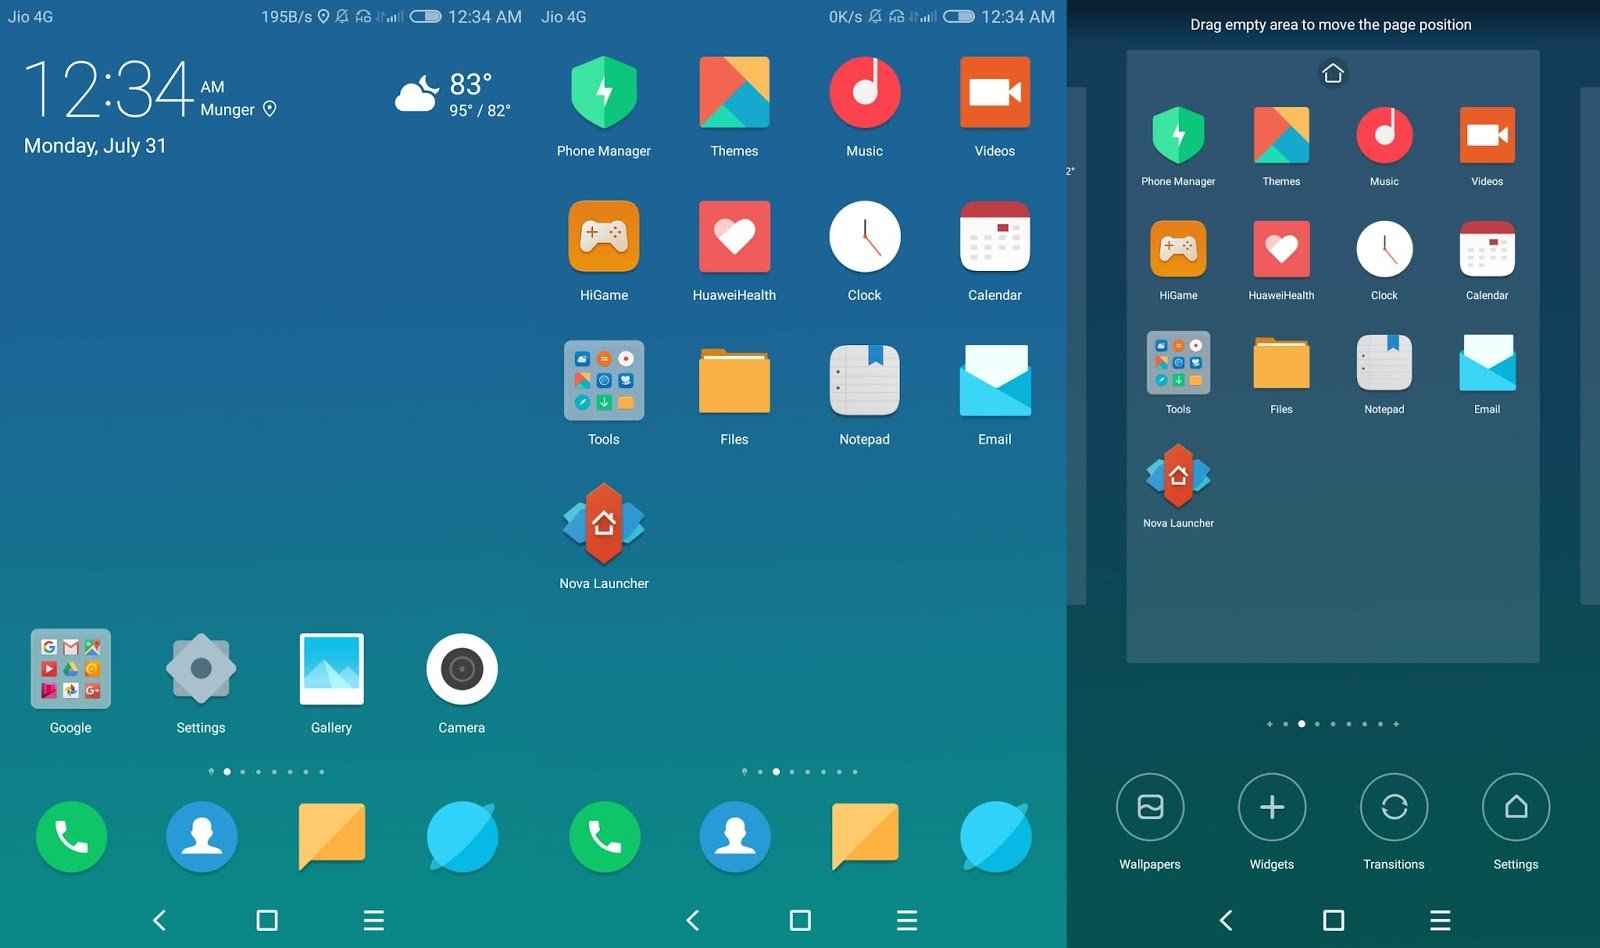 Download MIUI 9 Theme For EMUI 5.0 Devices